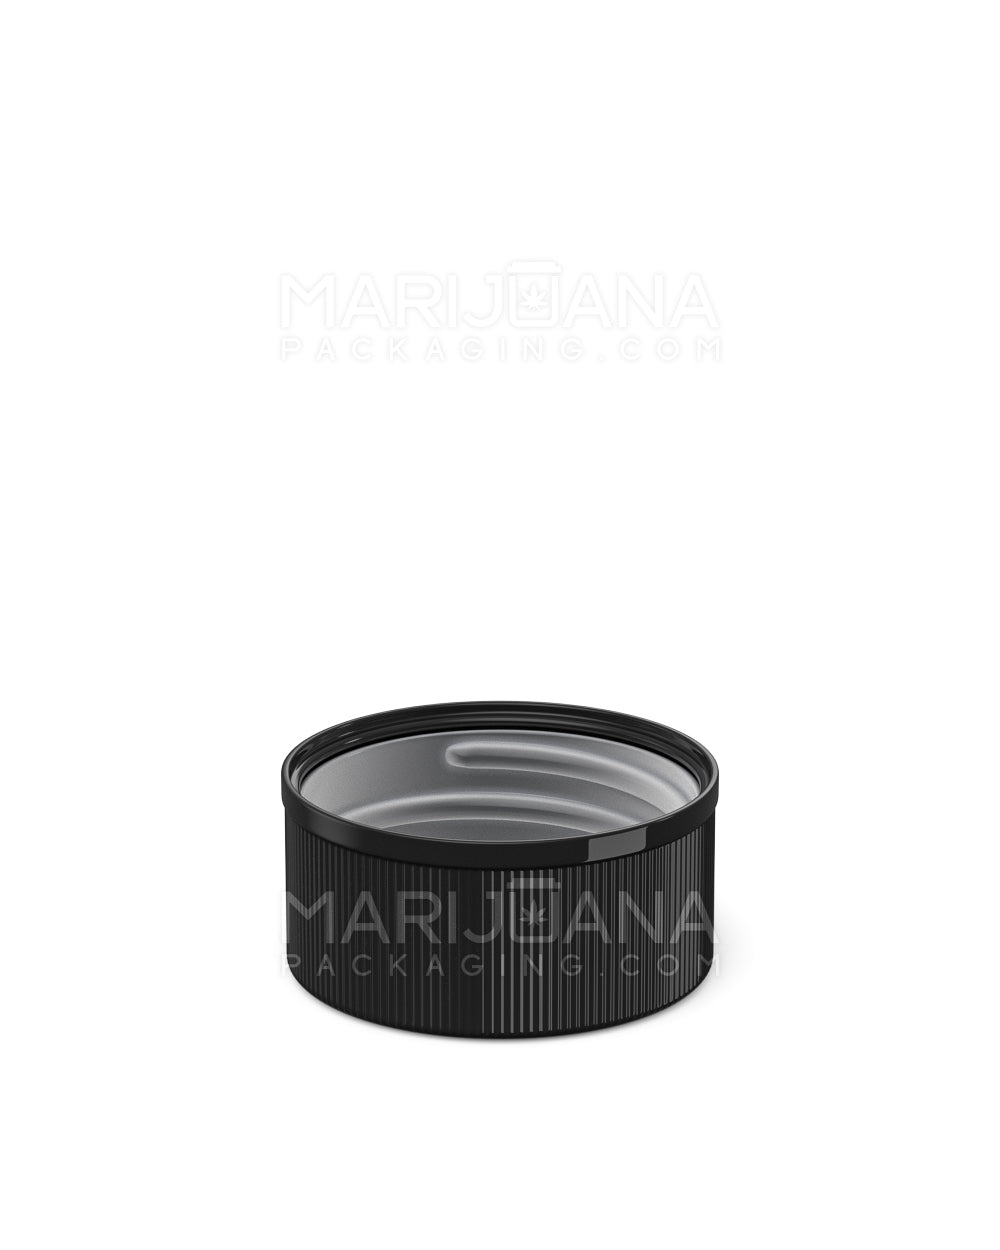 Child Resistant Ribbed Push Down & Turn Plastic Caps w/ Text | 28mm - Glossy Black | Sample - 4